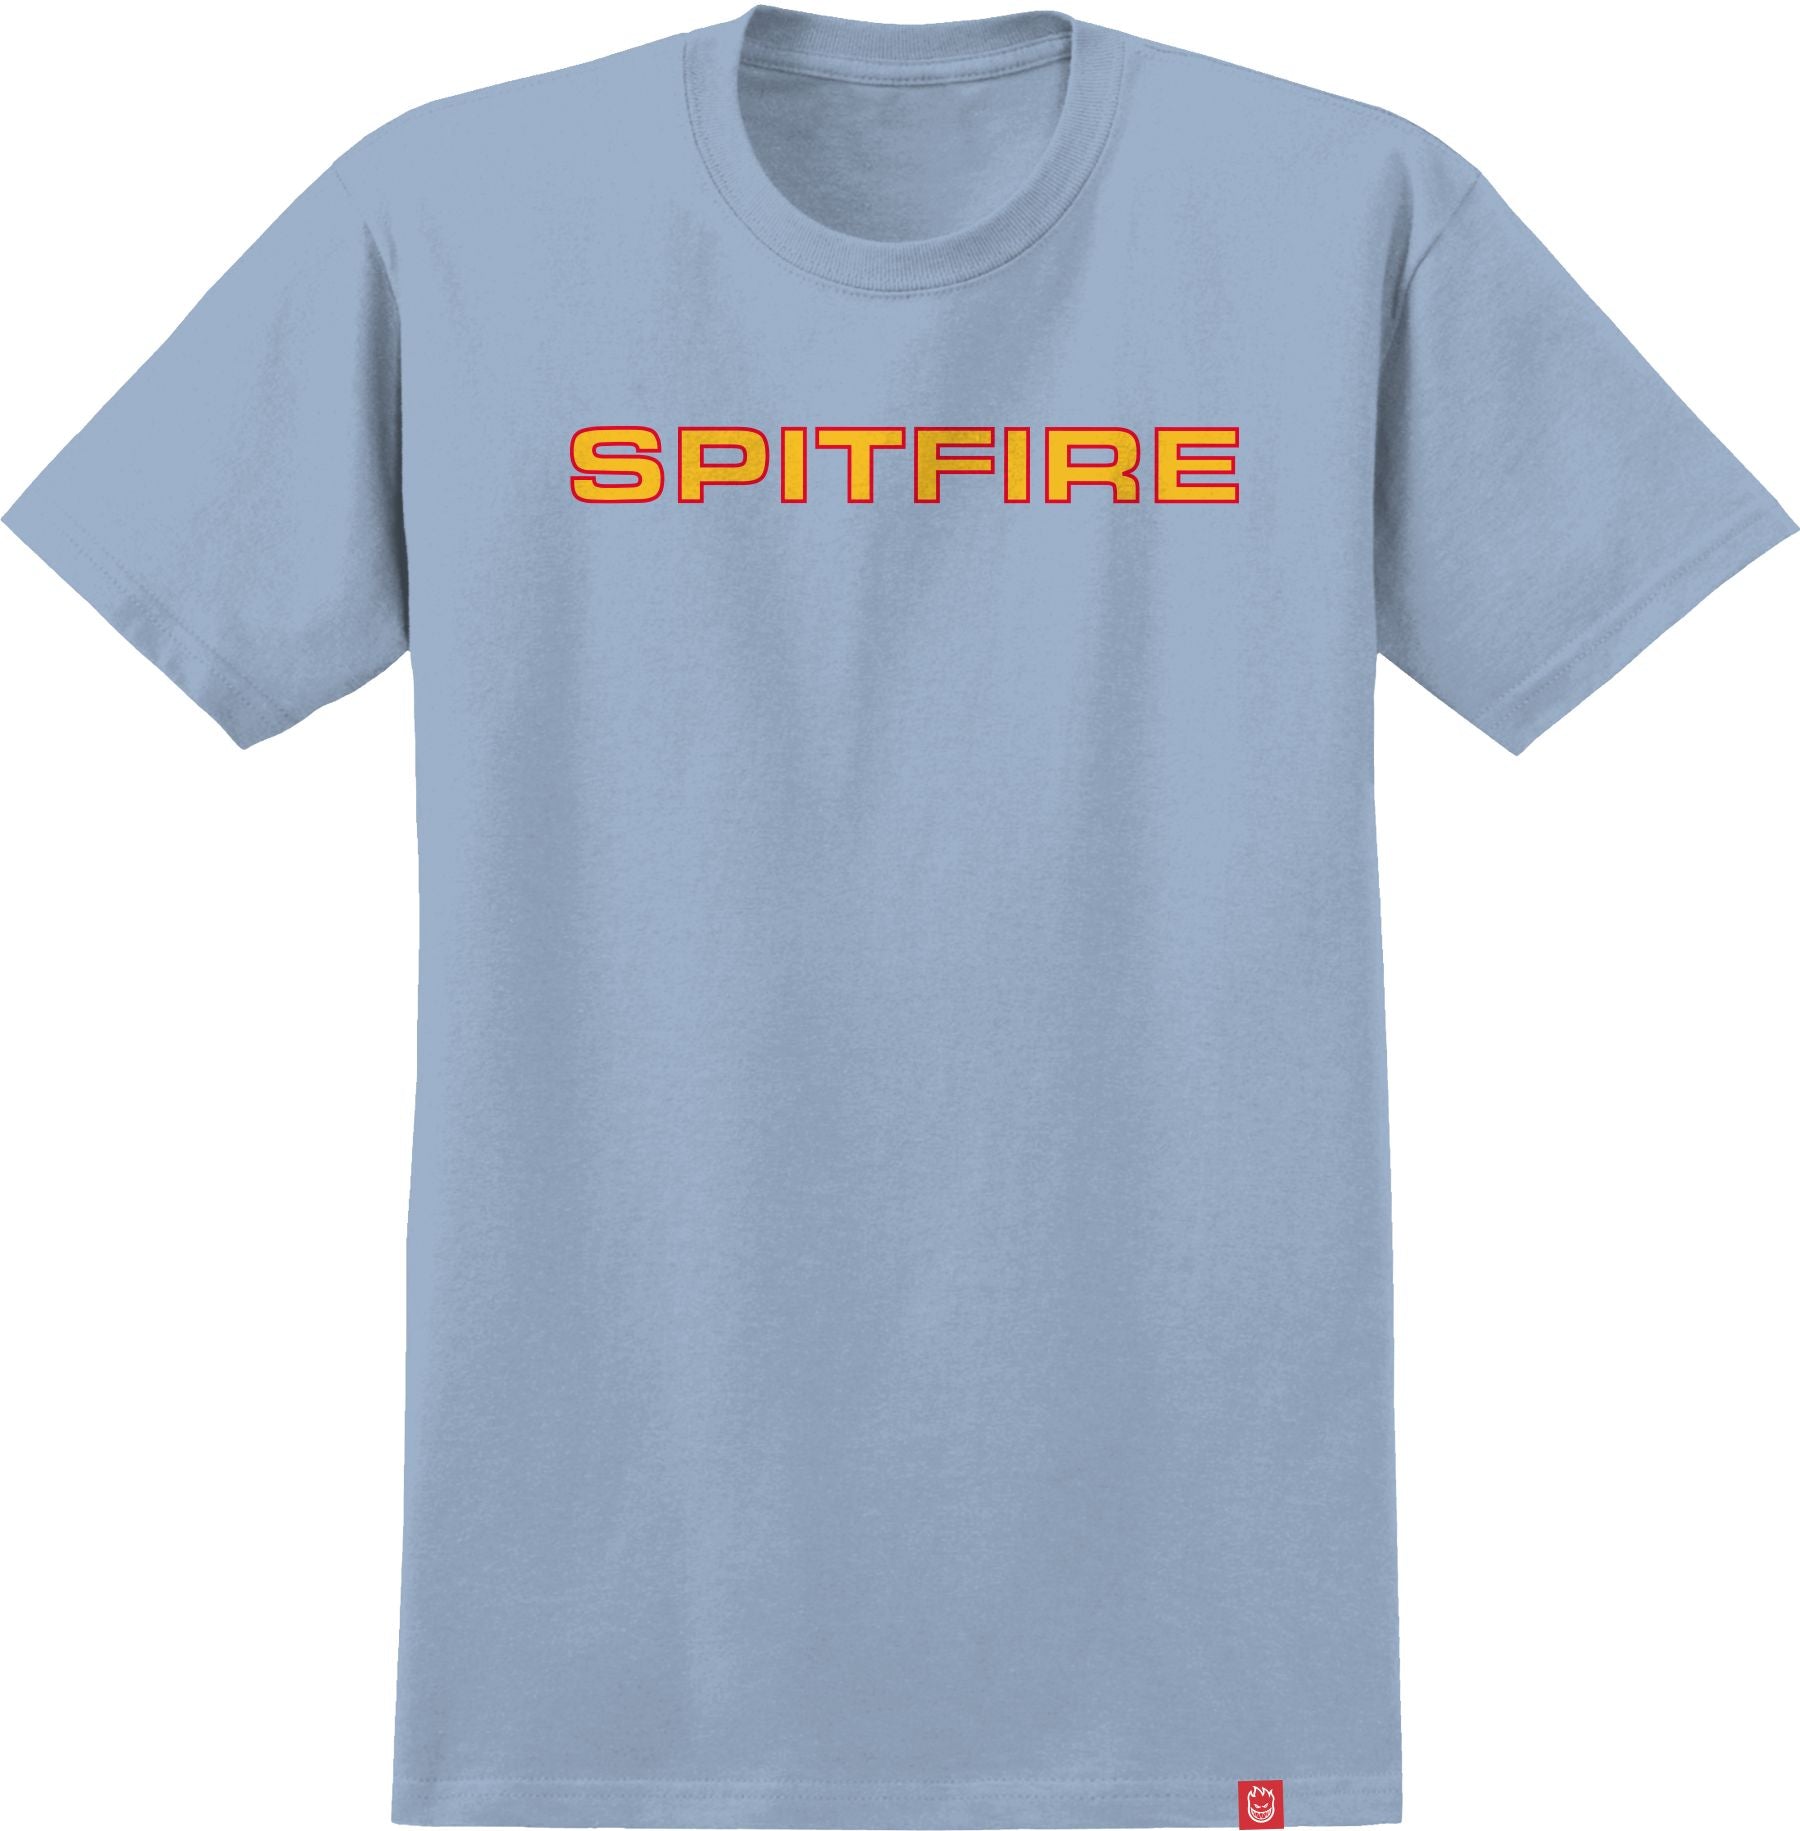 Spitfire Classic 87 Tee - Light Blue/Gold/Red